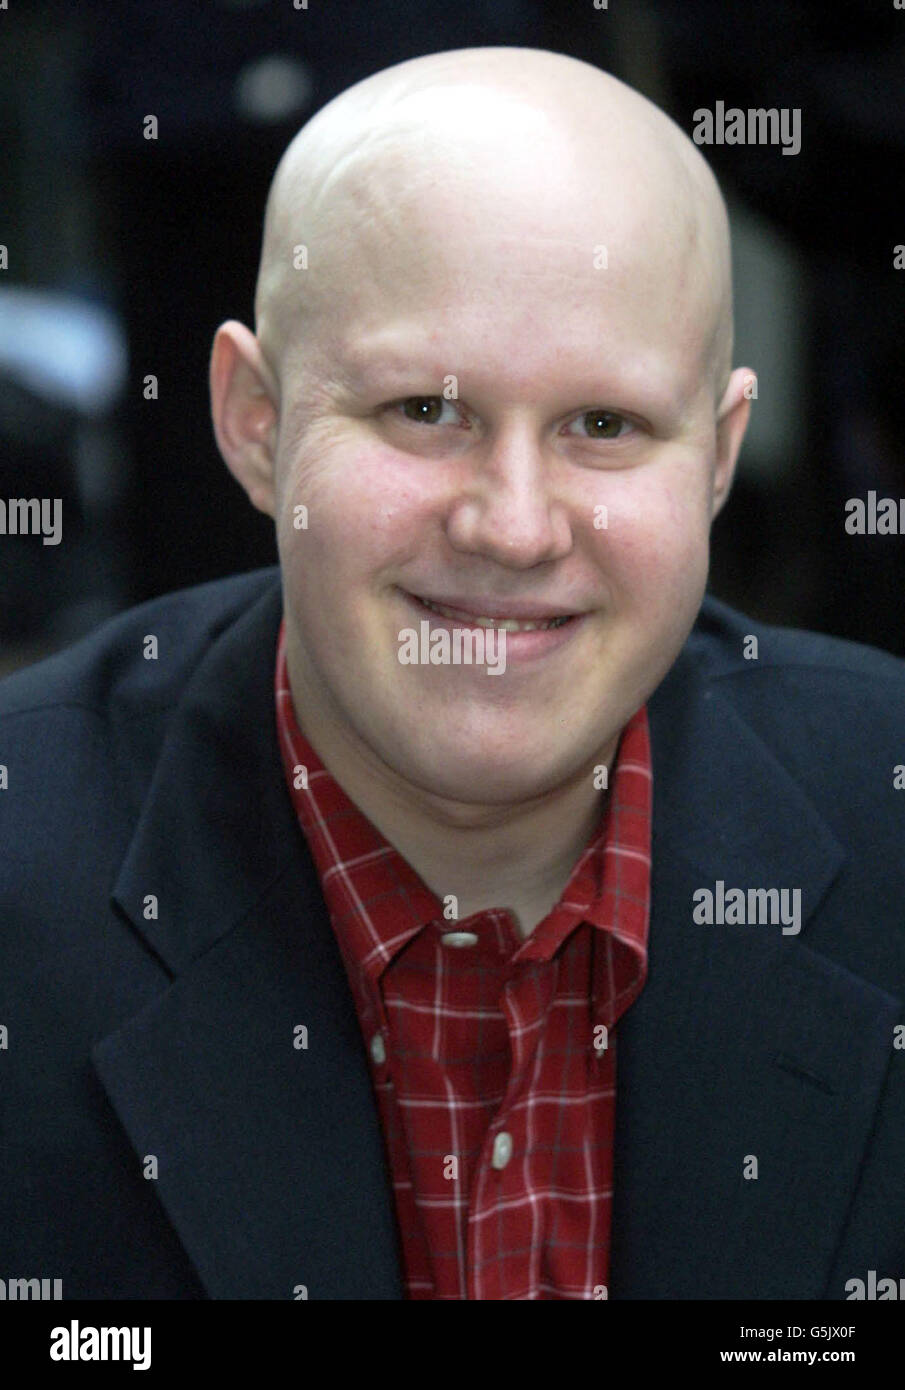 Actor Matt Lucas who plays Leigh Bowery in Taboo, a musical recounting the 80's pop era based on the expereinces of Boy George. The singer/DJ will also be providing the production with music and lyrics. Stock Photo